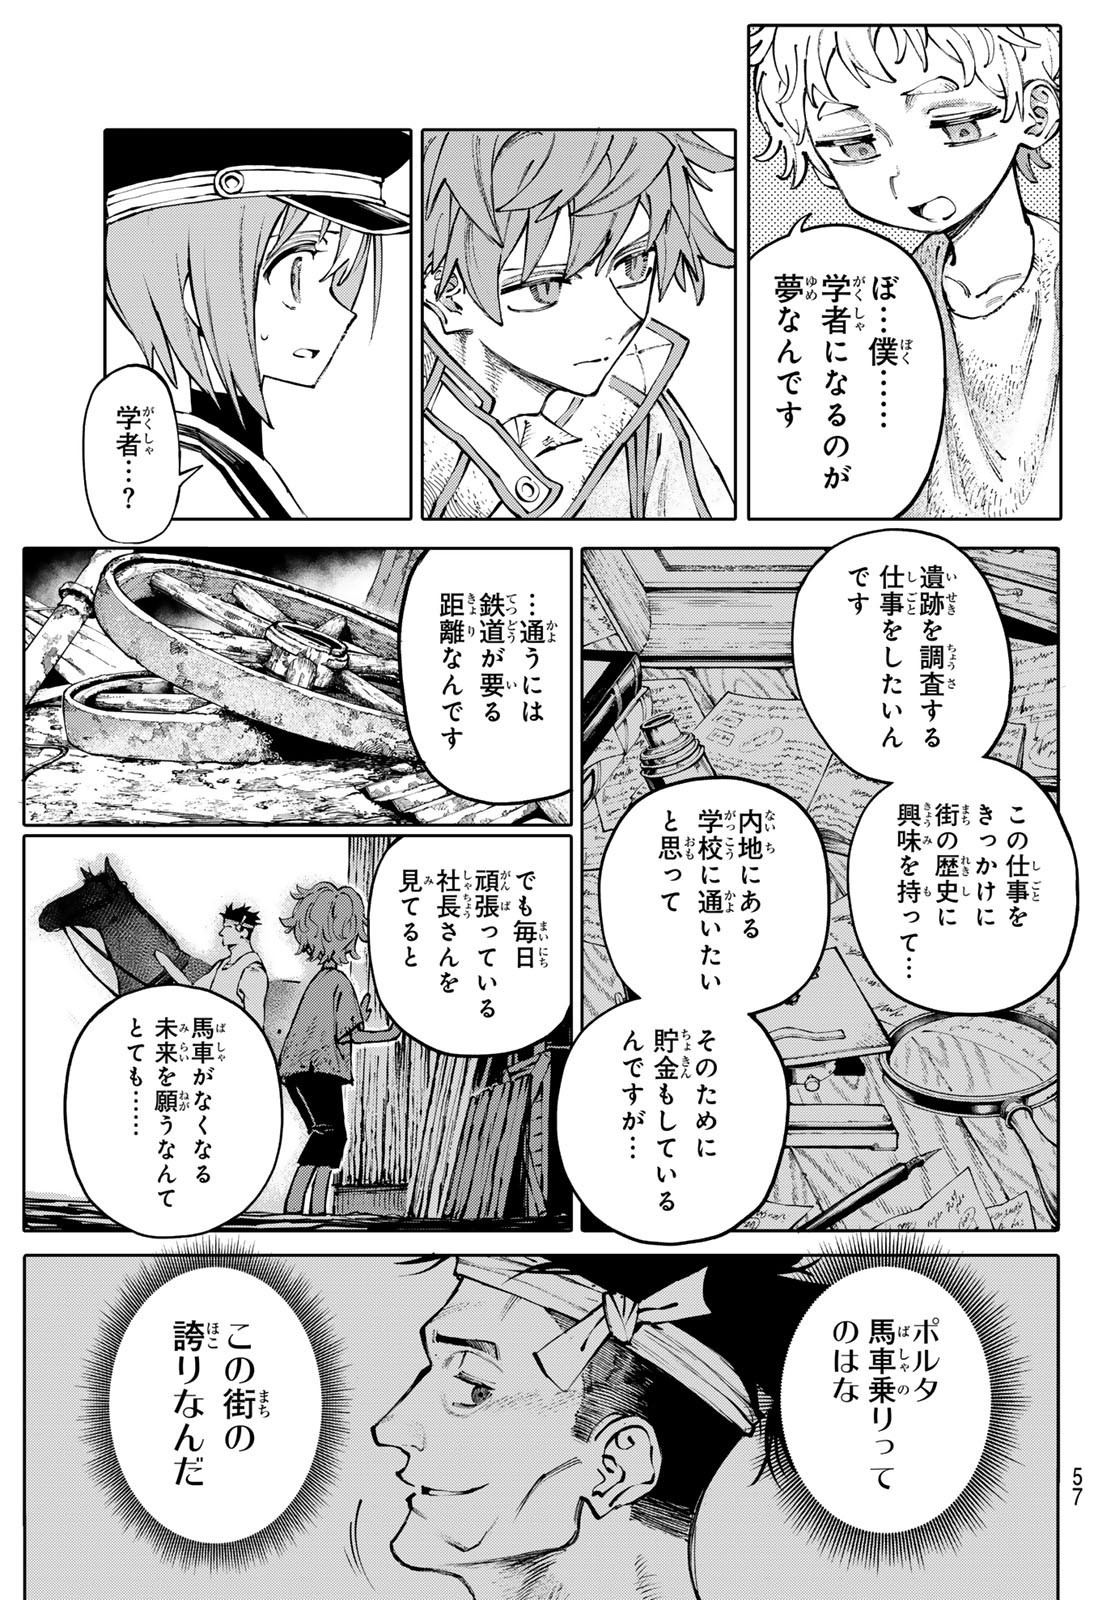 Weekly Shōnen Magazine - 週刊少年マガジン - Chapter 2024-34 - Page 54